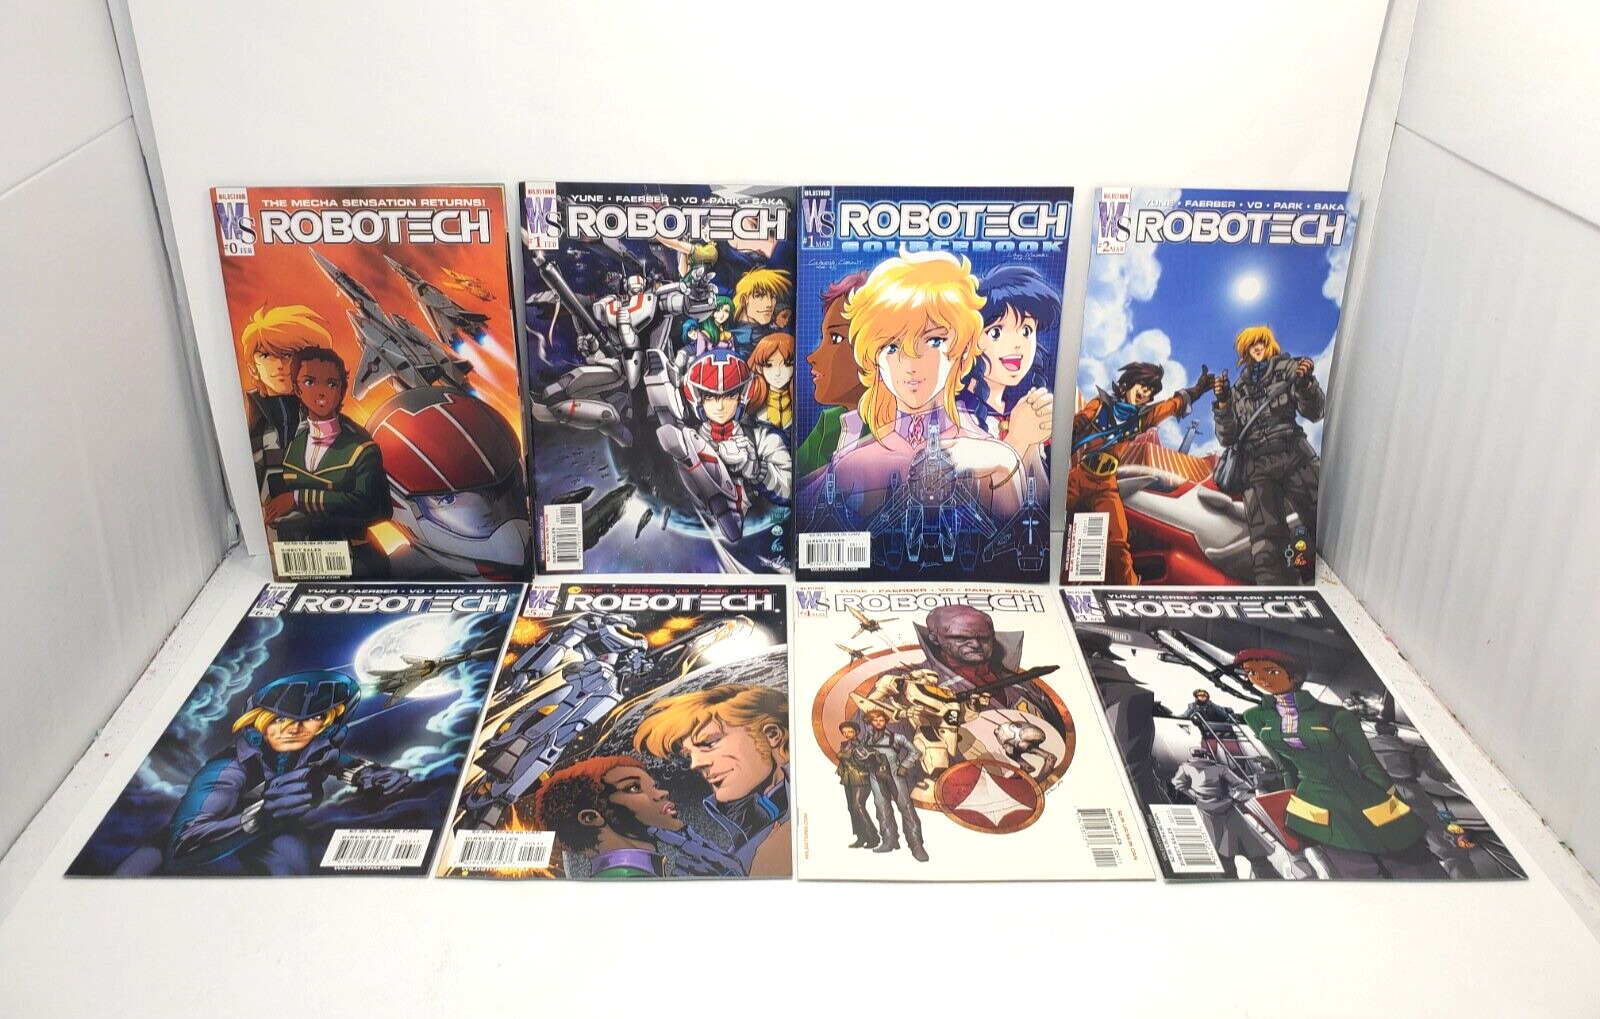 ROBOTECH Comic Lot of 8 Issues 0, 1, 2, 3, 4, 5, 6 (2002 Series) DC WILDSTORM